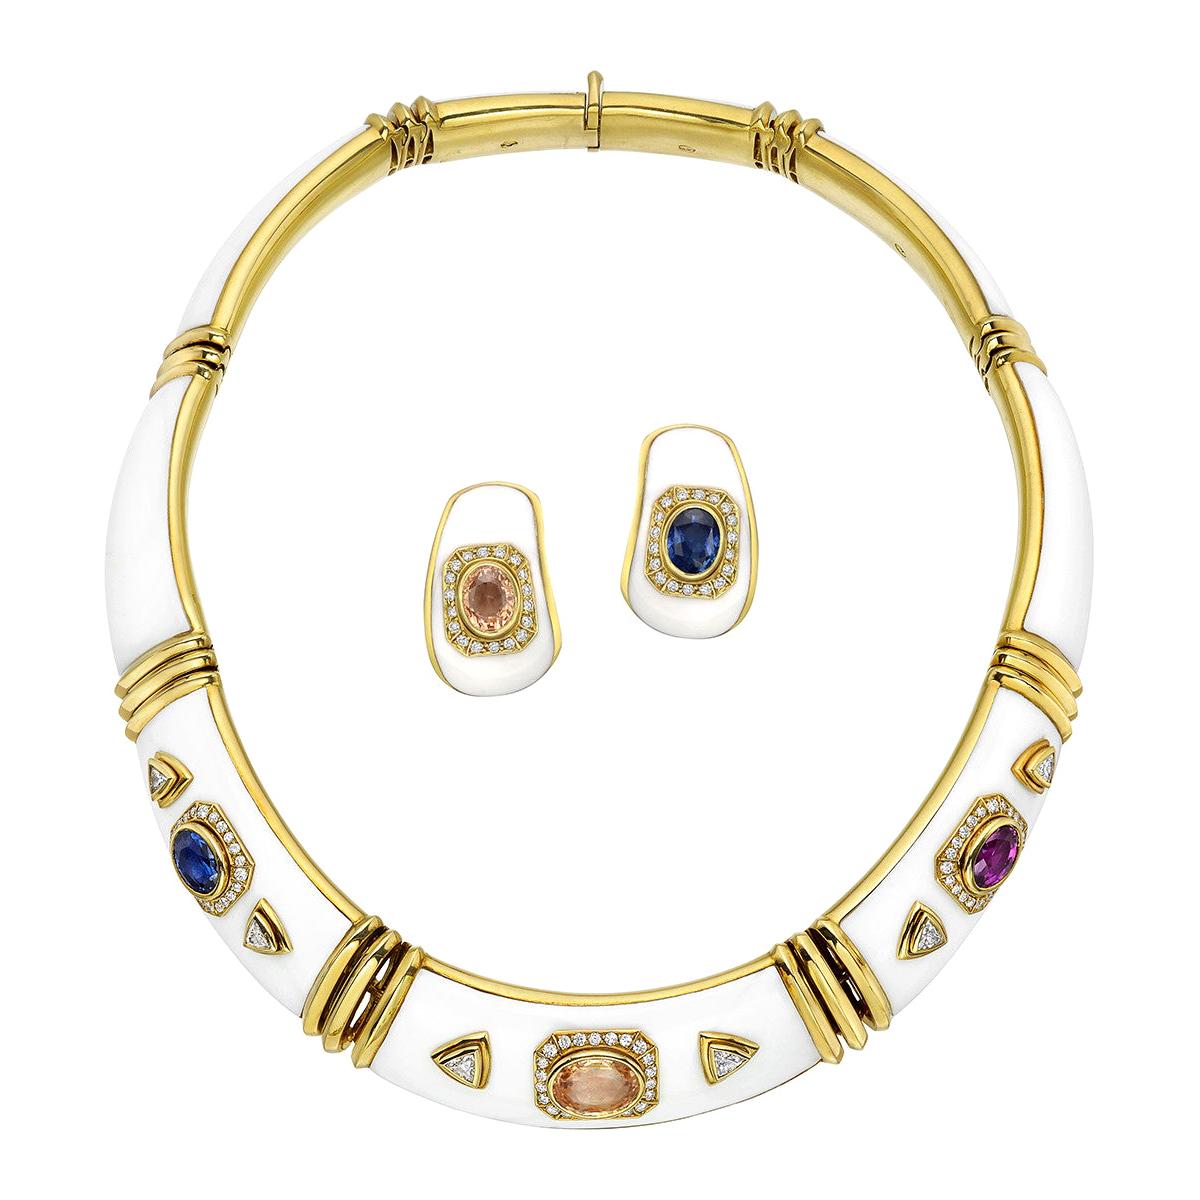 Multicolored Sapphire, Diamond and White Enamel Necklace and Earclips